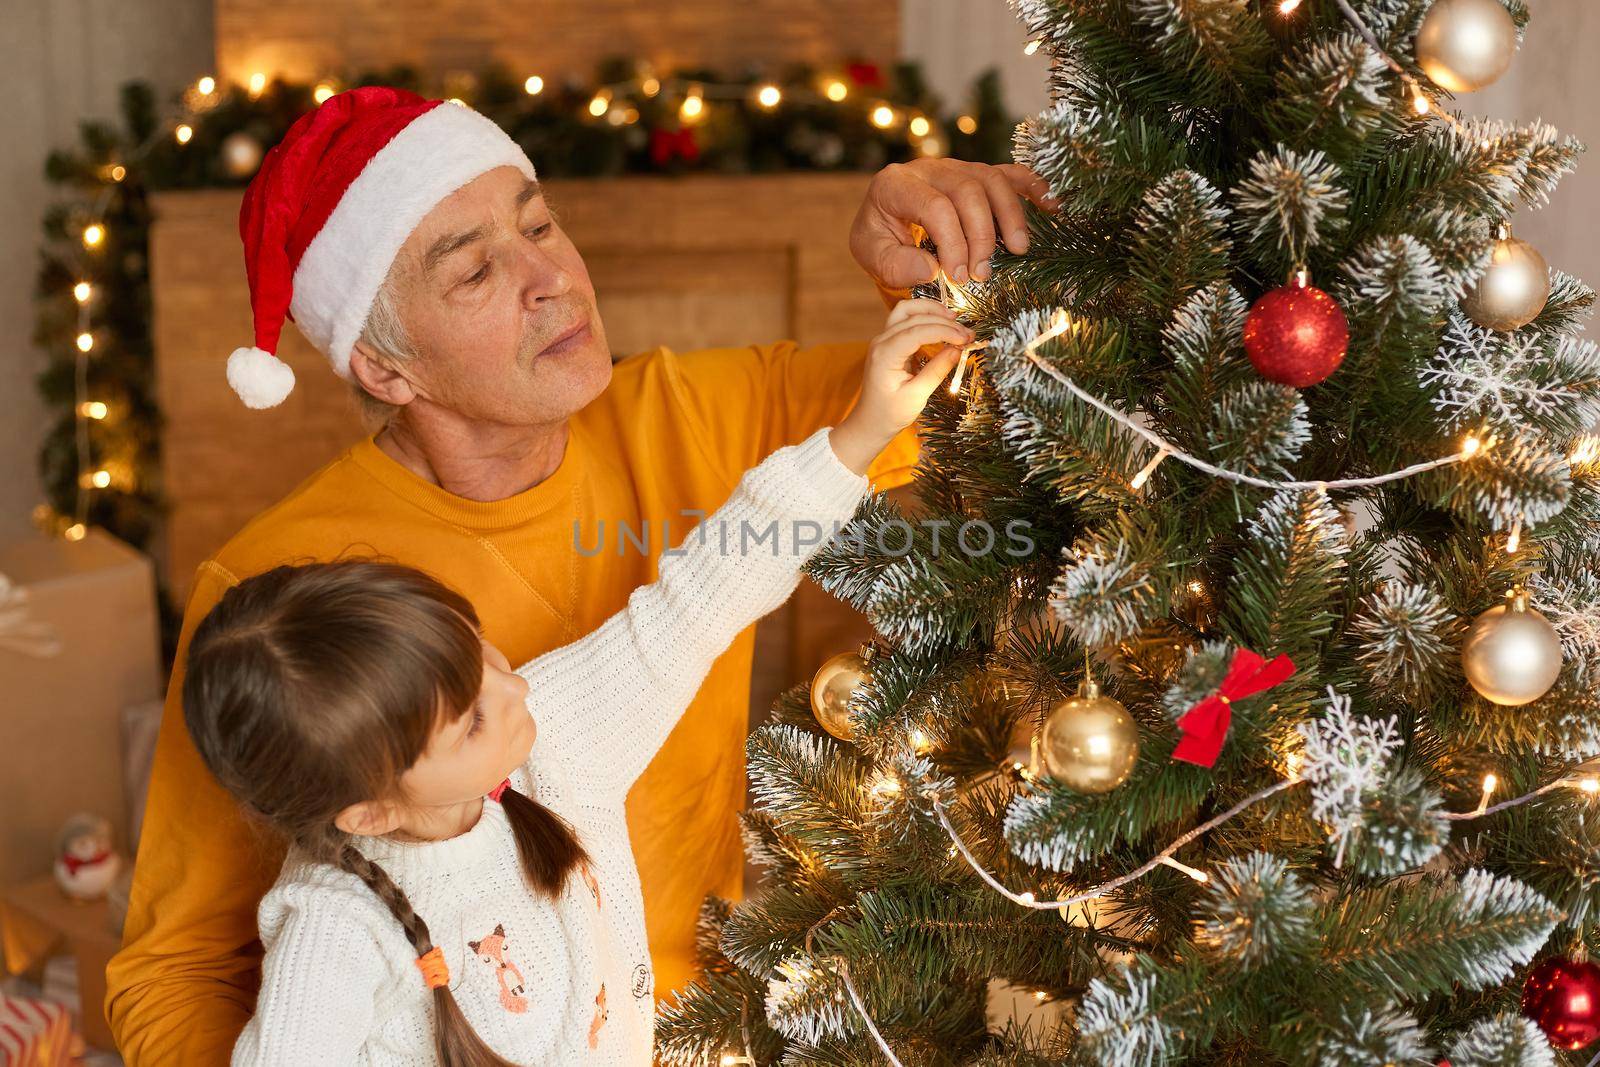 Grandfather and granddaughter decorate fir tree on Christmas eve, looking concentrated at xmas tree, wearing casual attires, posing in festive living room, feels happy to spend time together.